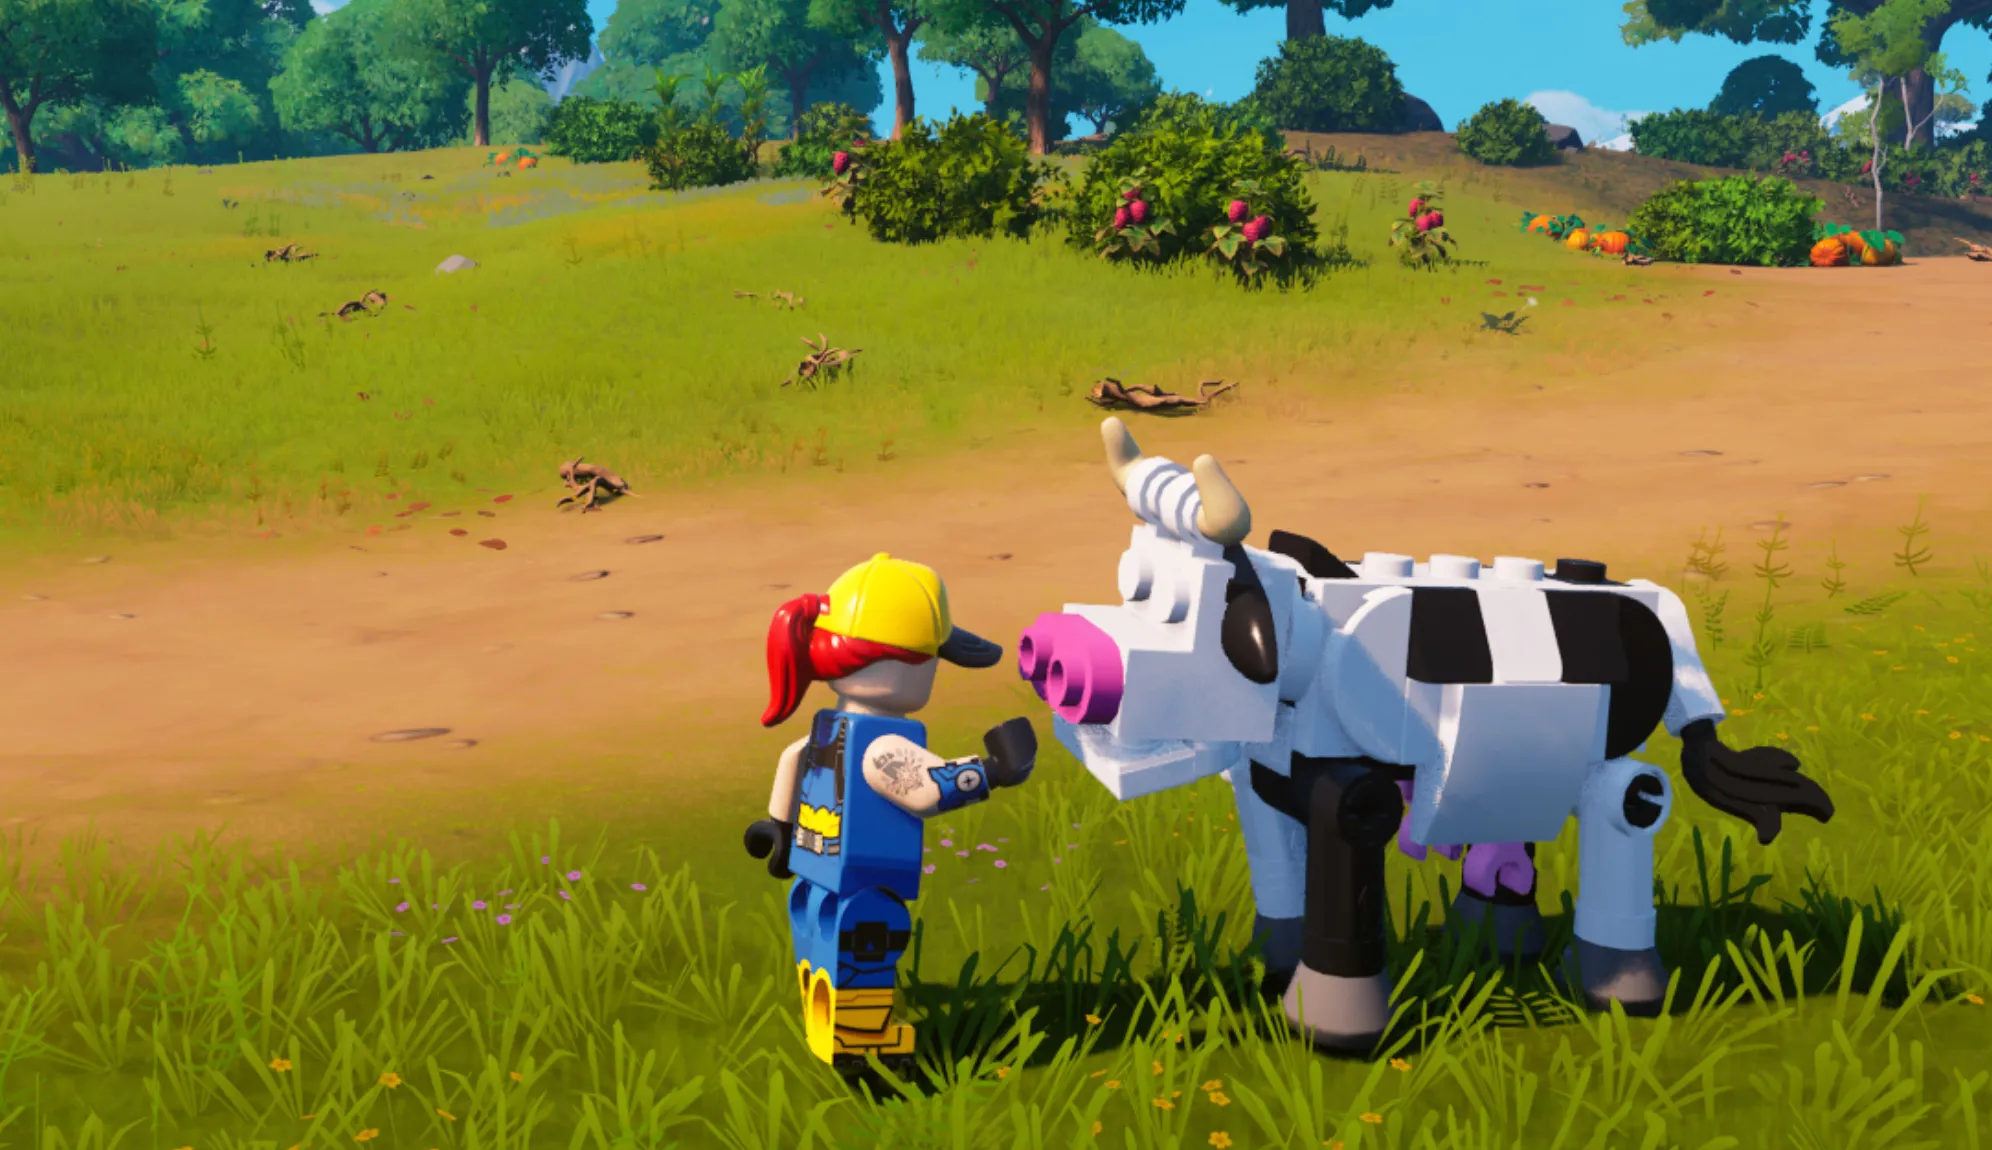 LEGO Fortnite Leaks: What's coming in the new game mode?